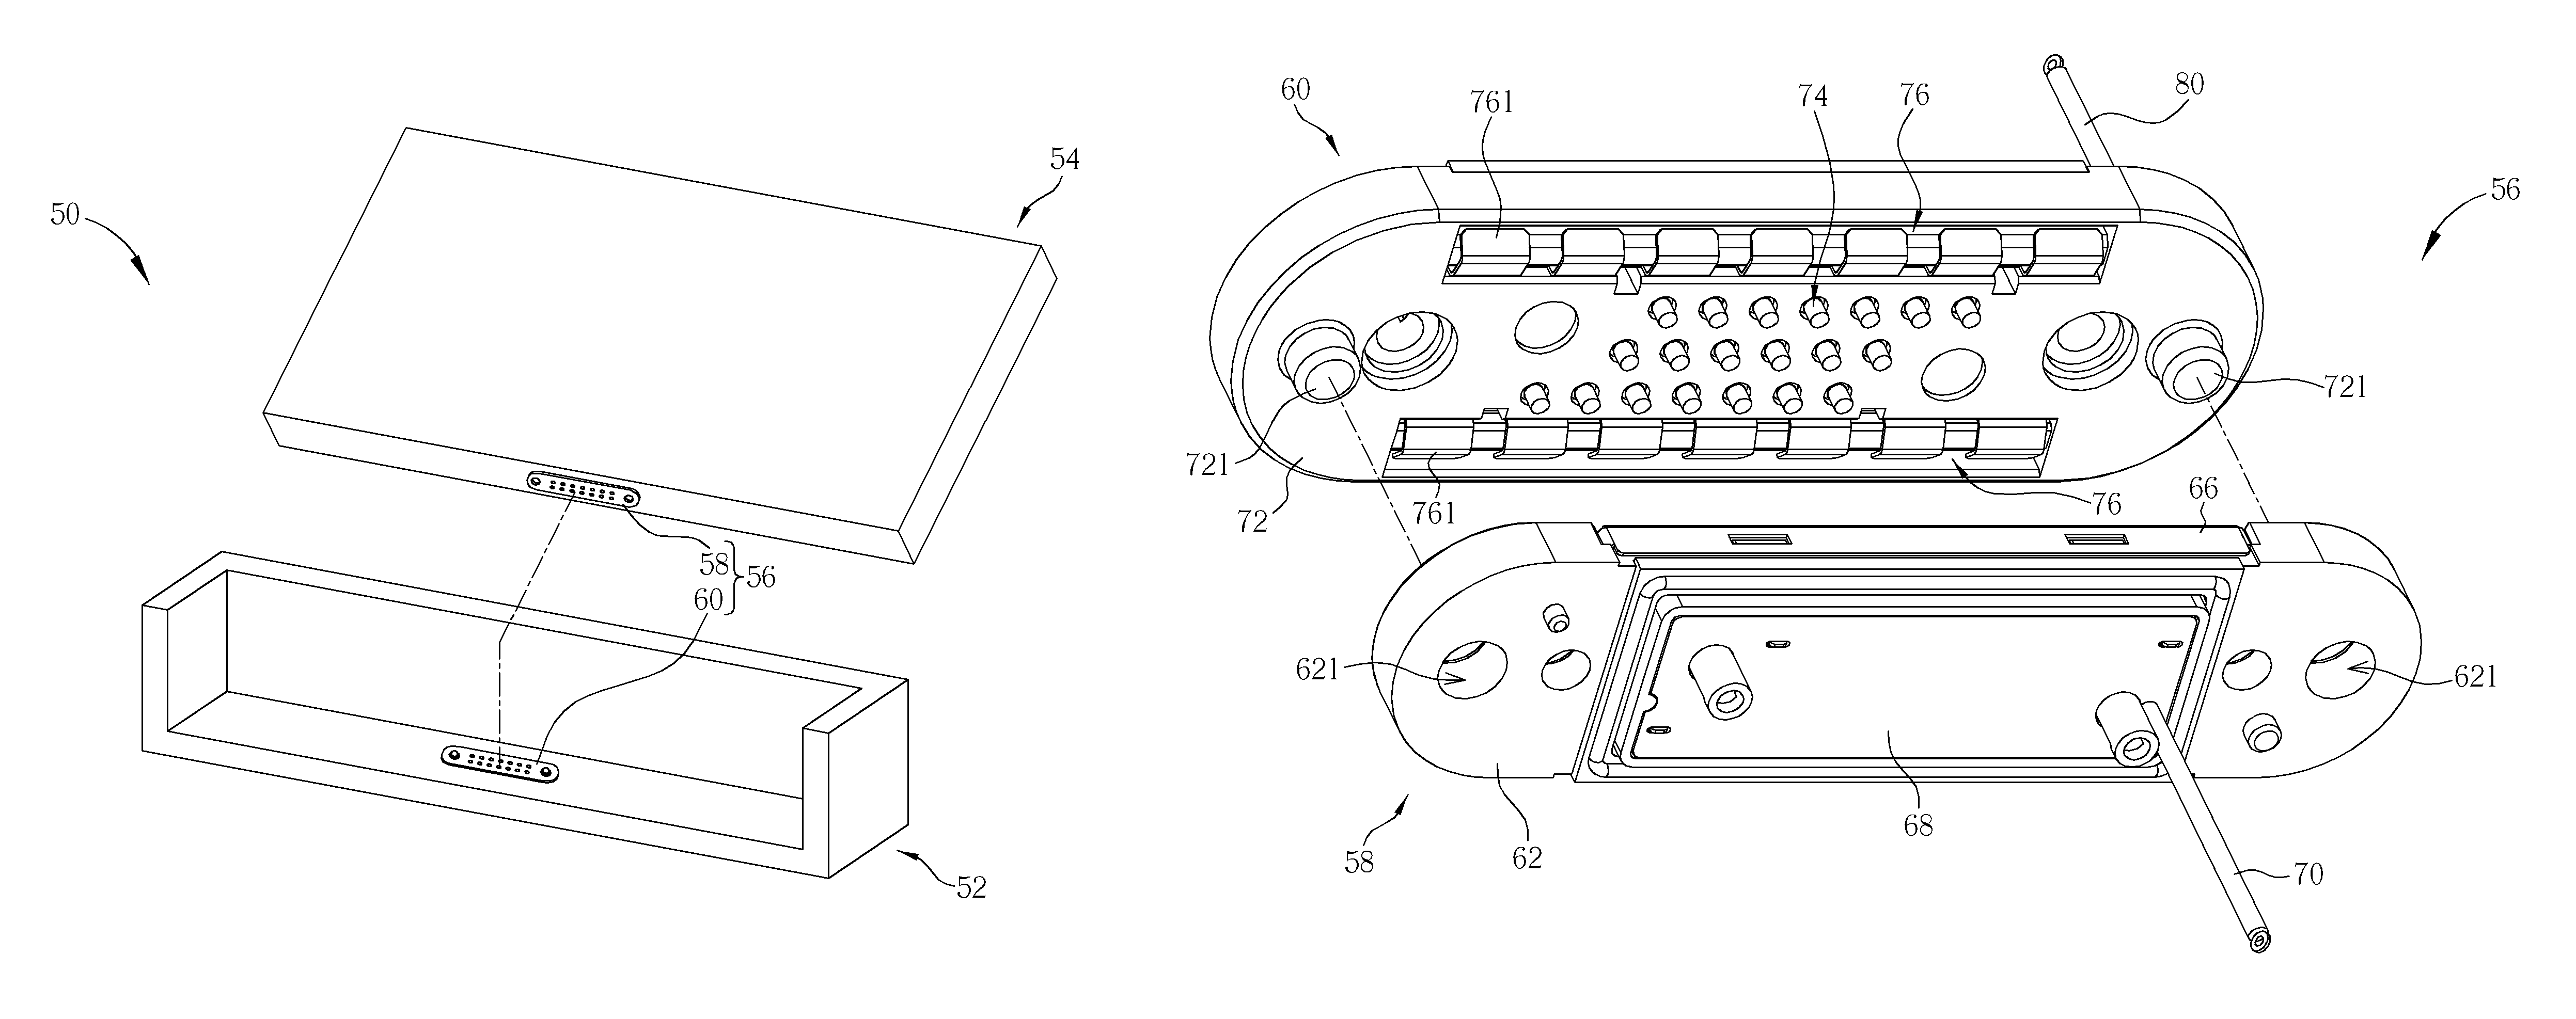 Grounding a docking station with a host device using grounding layers of multilayer printed circuit boards